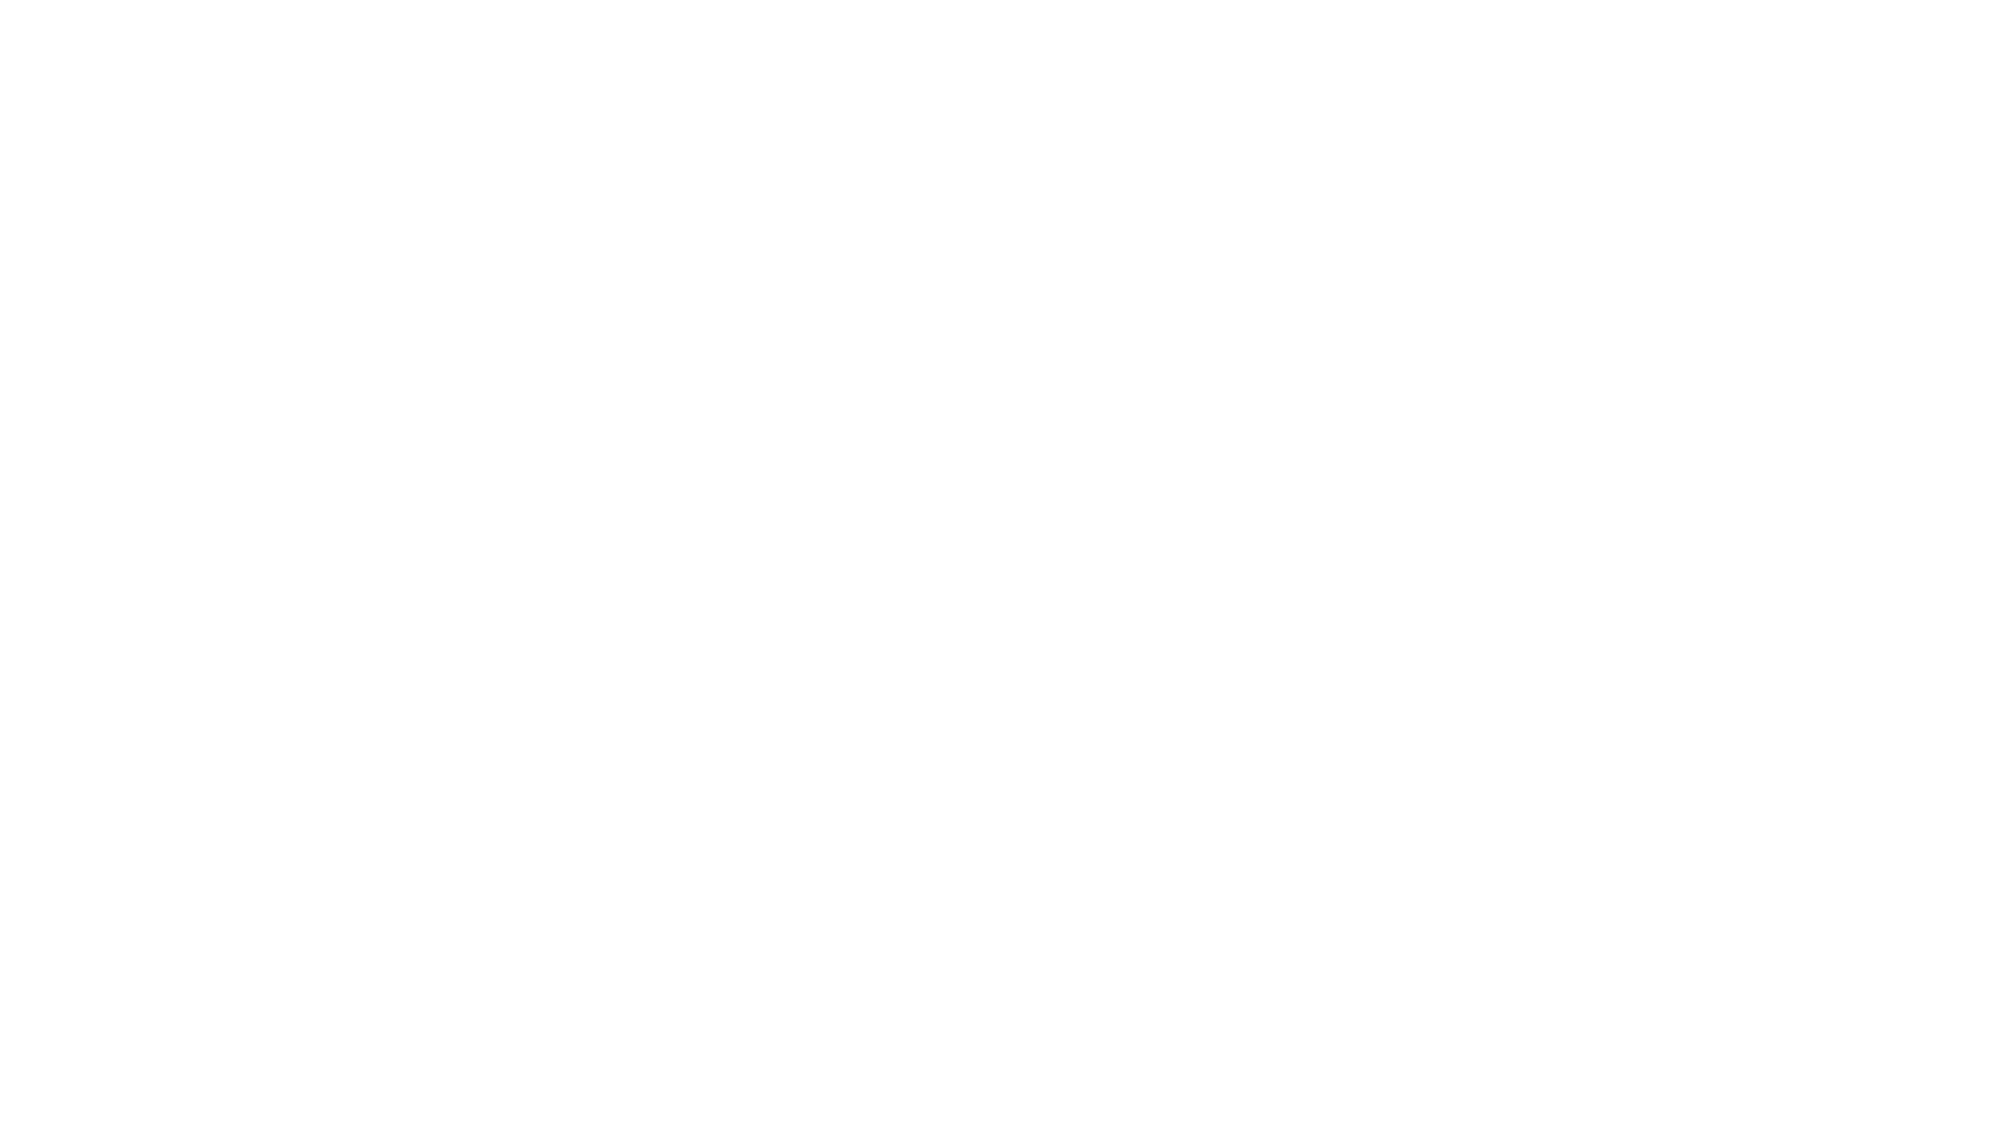 Valley Man Photography